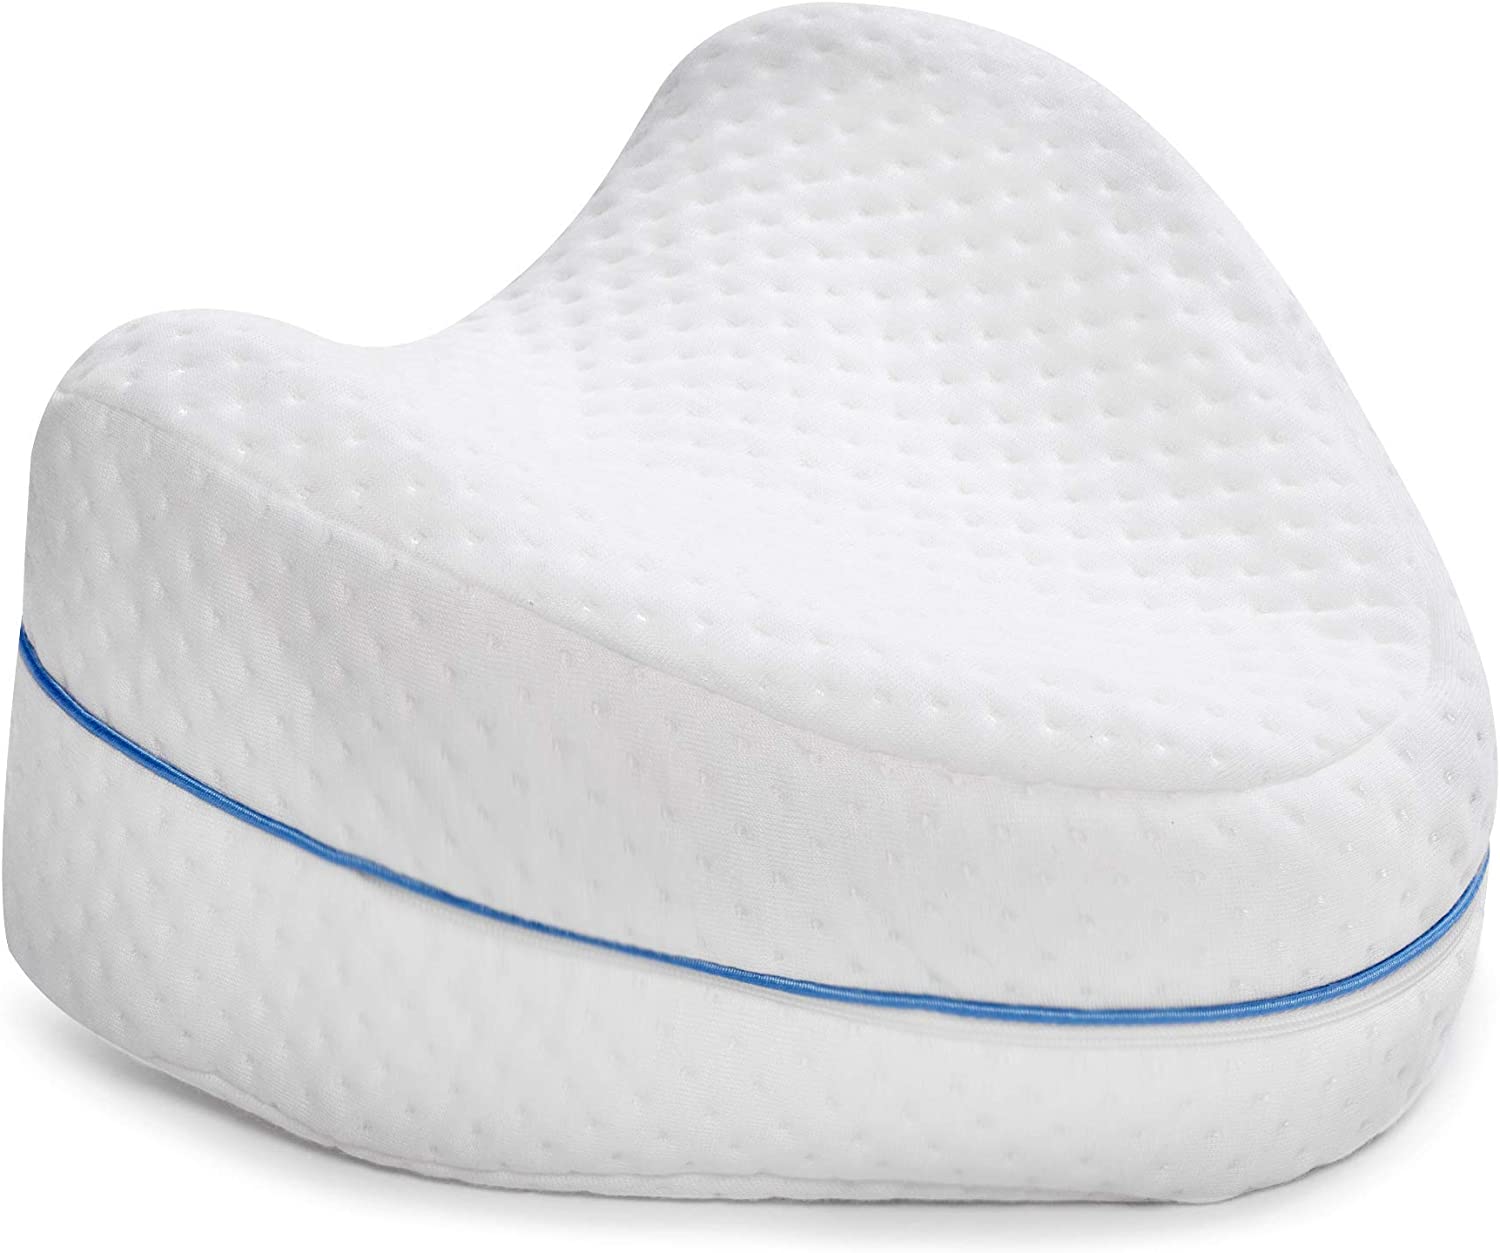 Product page photo of the Contour Legacy Leg & Knee Pillow